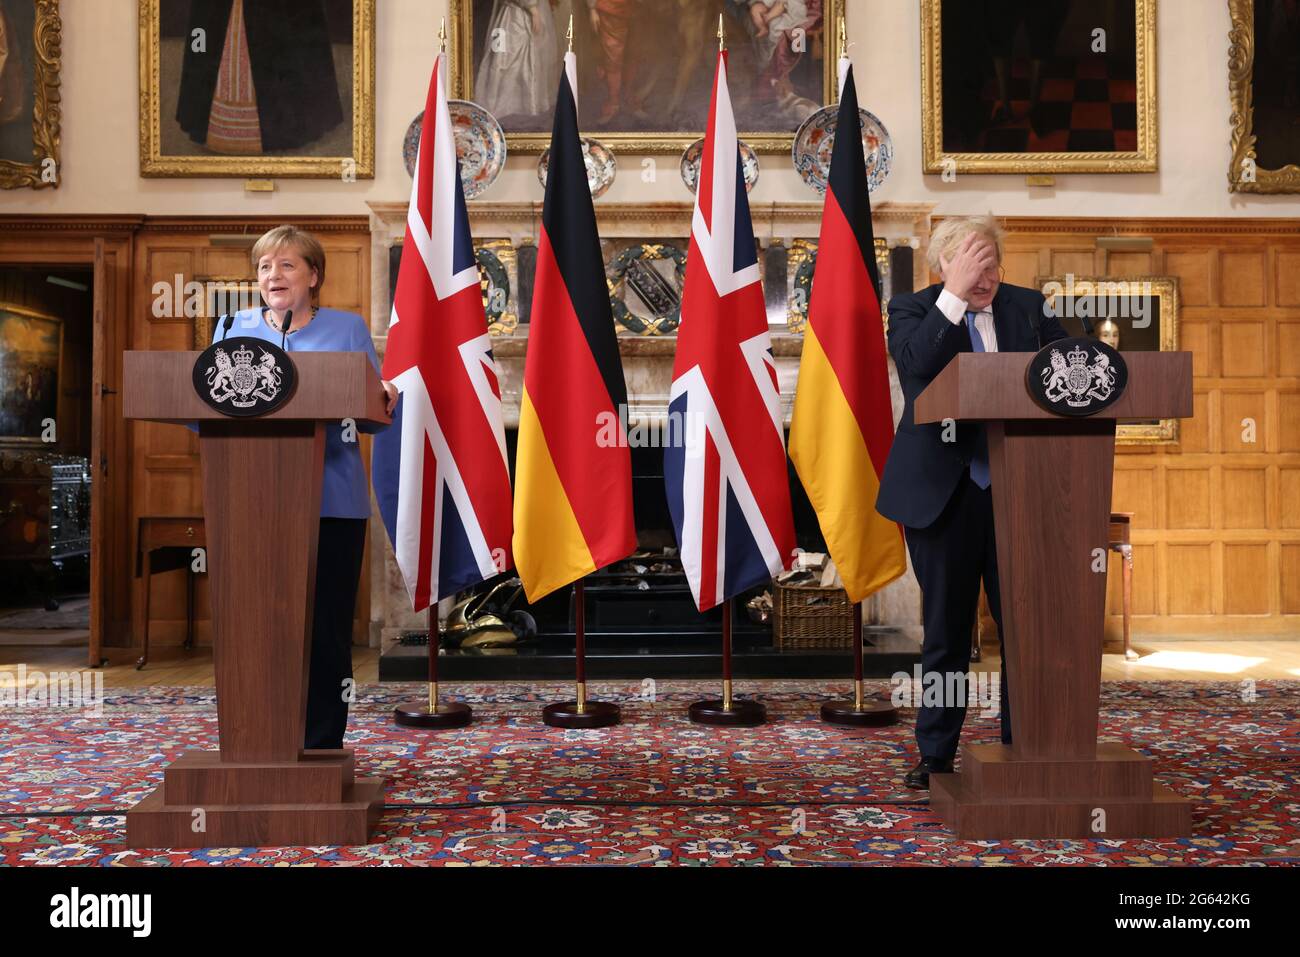 Prime Minister Boris Johnson and the Chancellor of Germany, Angela Merkel, during a press conference after their meeting at Chequers, the country house of the Prime Minister of the United Kingdom, in Buckinghamshire. Picture date: Friday July 2, 2021. Stock Photo